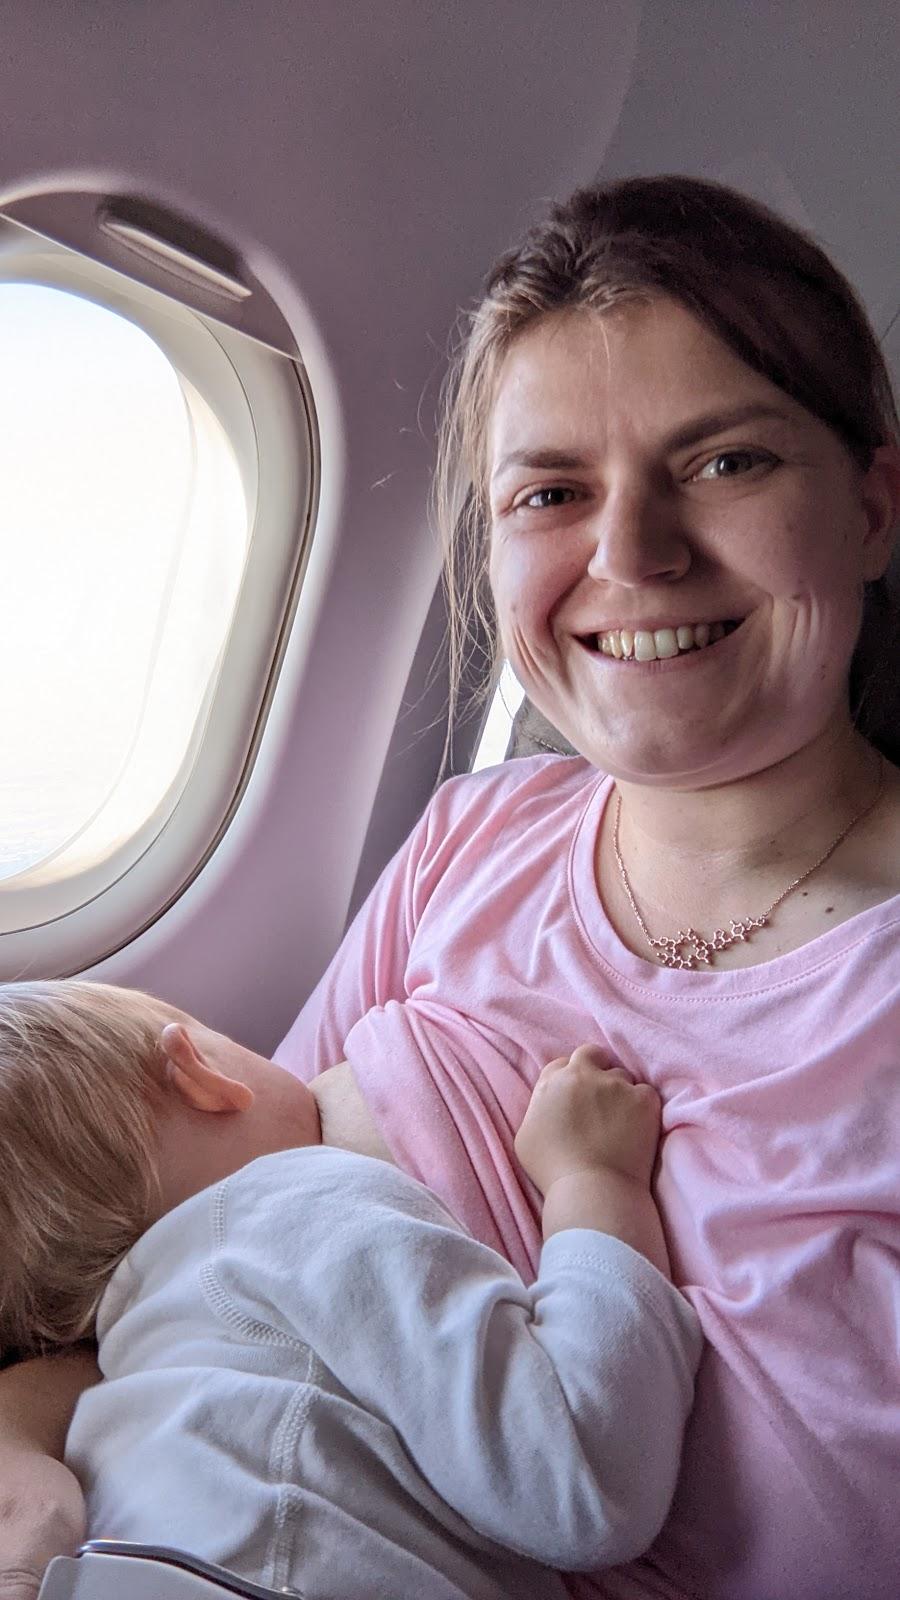 Fiona is breastfeeding her daughter while on a plane. Her daughter is laid across her lap with a plane seatbelt buckled around her. Fiona is wearing a pink t-shirt and a necklace in the shape of the chemical oxytocin.